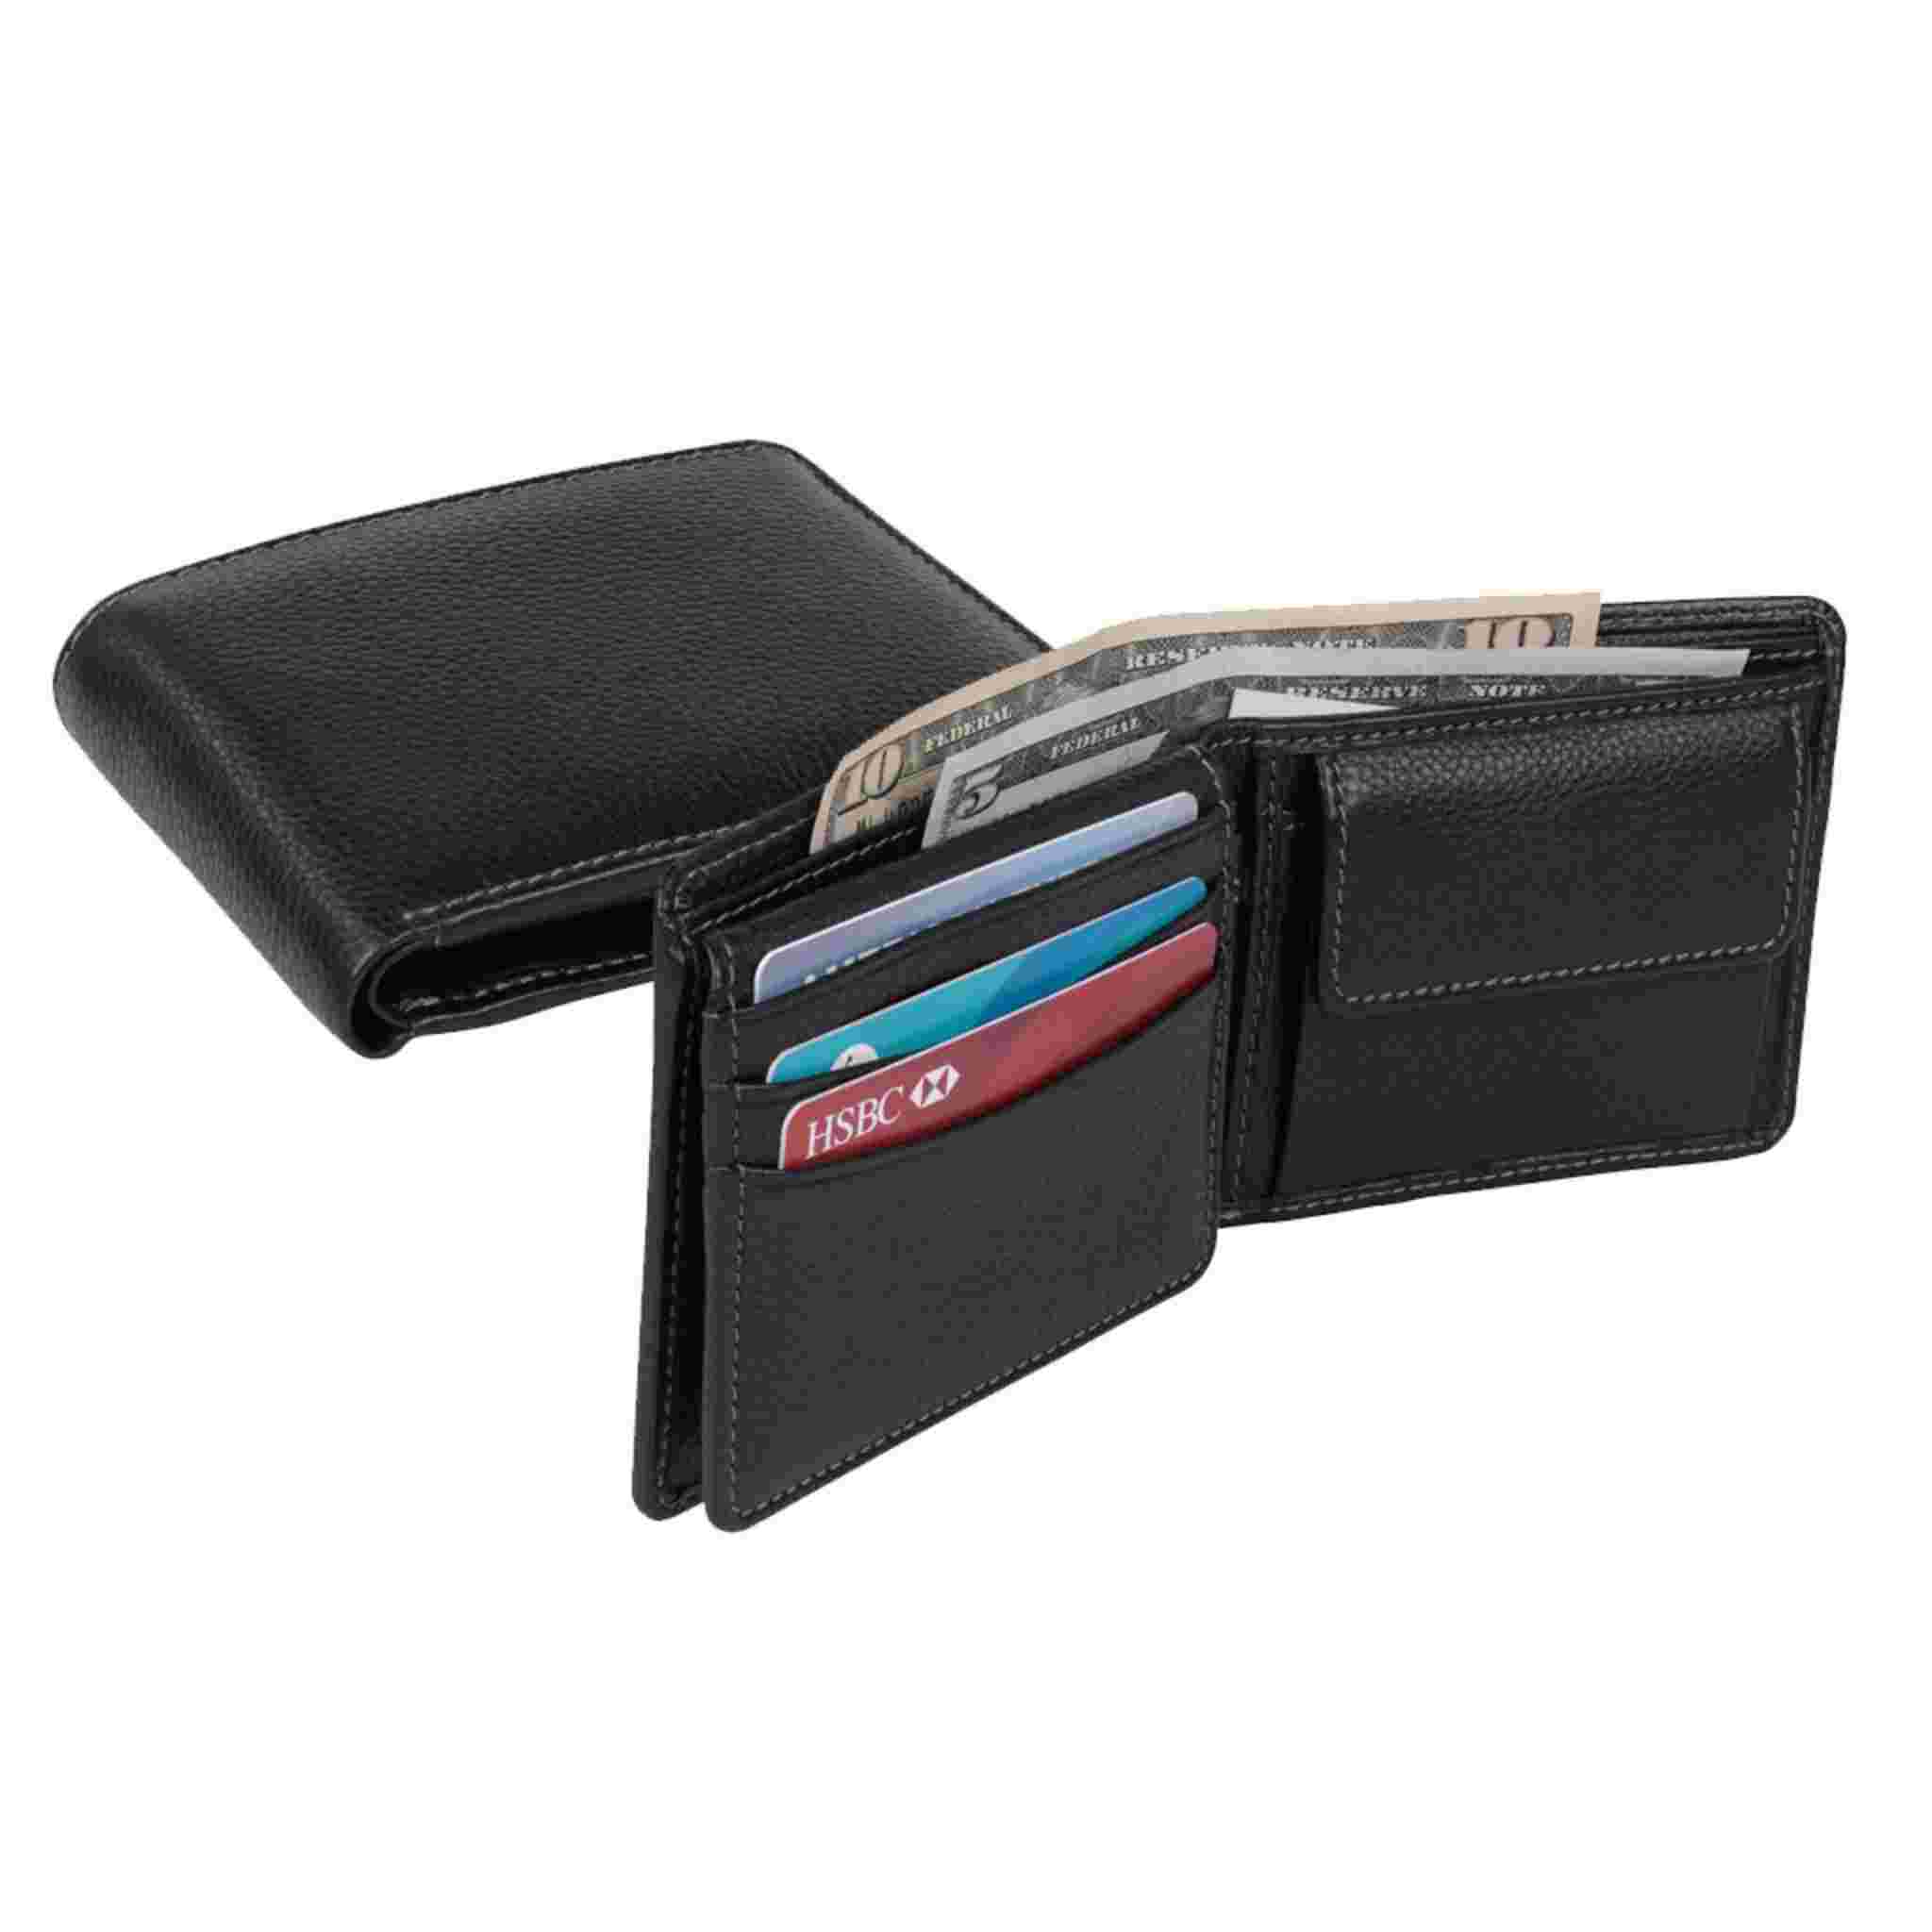 Two wallets, one closed and one open showing card slots